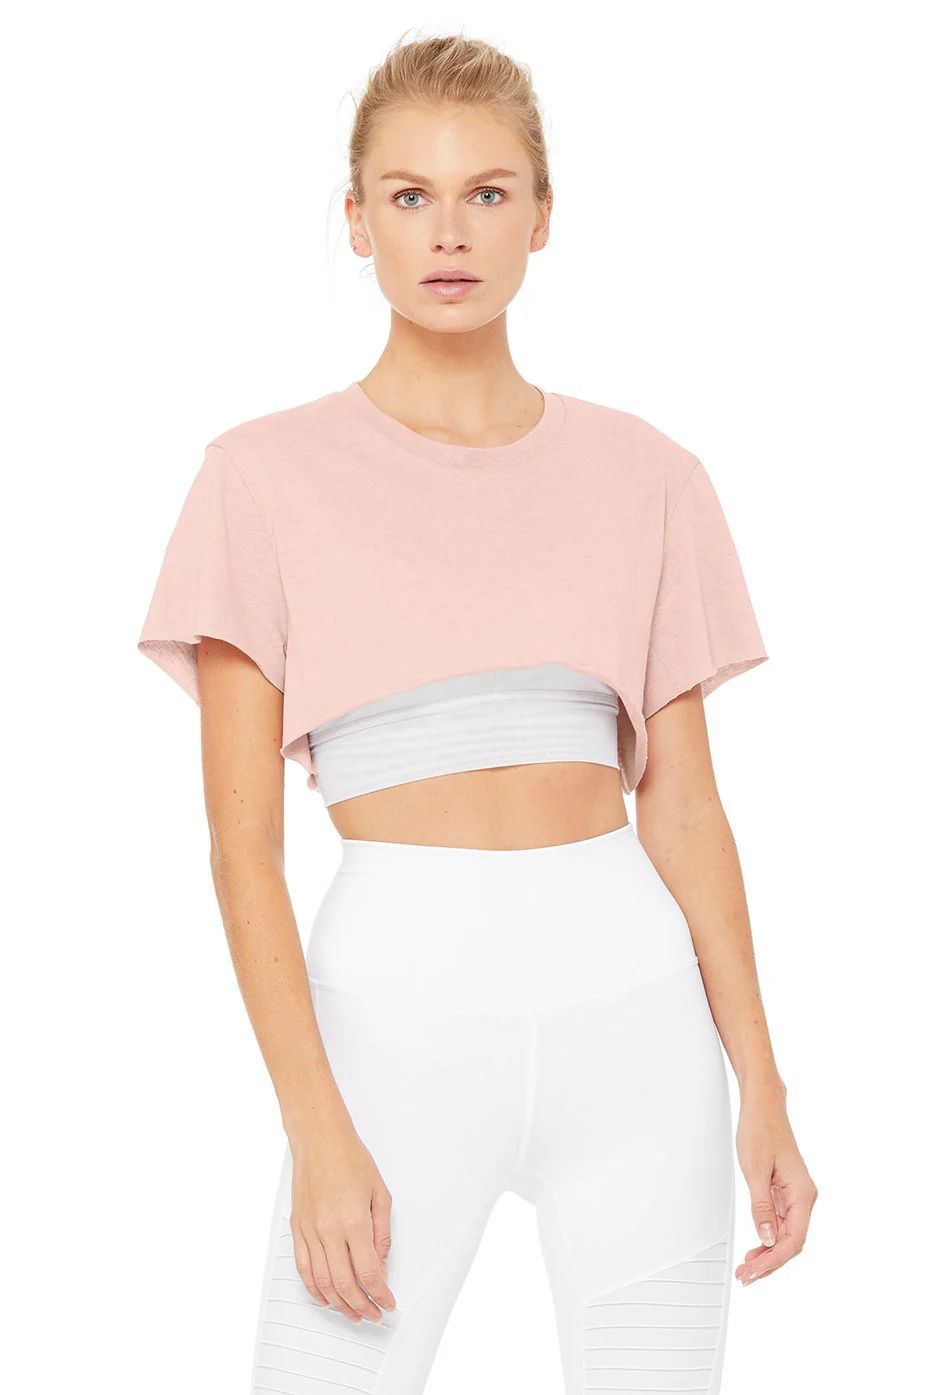 Alo YogaÂ® | Cropped Short Sleeve Top in Pale Mauve, Size: Small | Alo Yoga